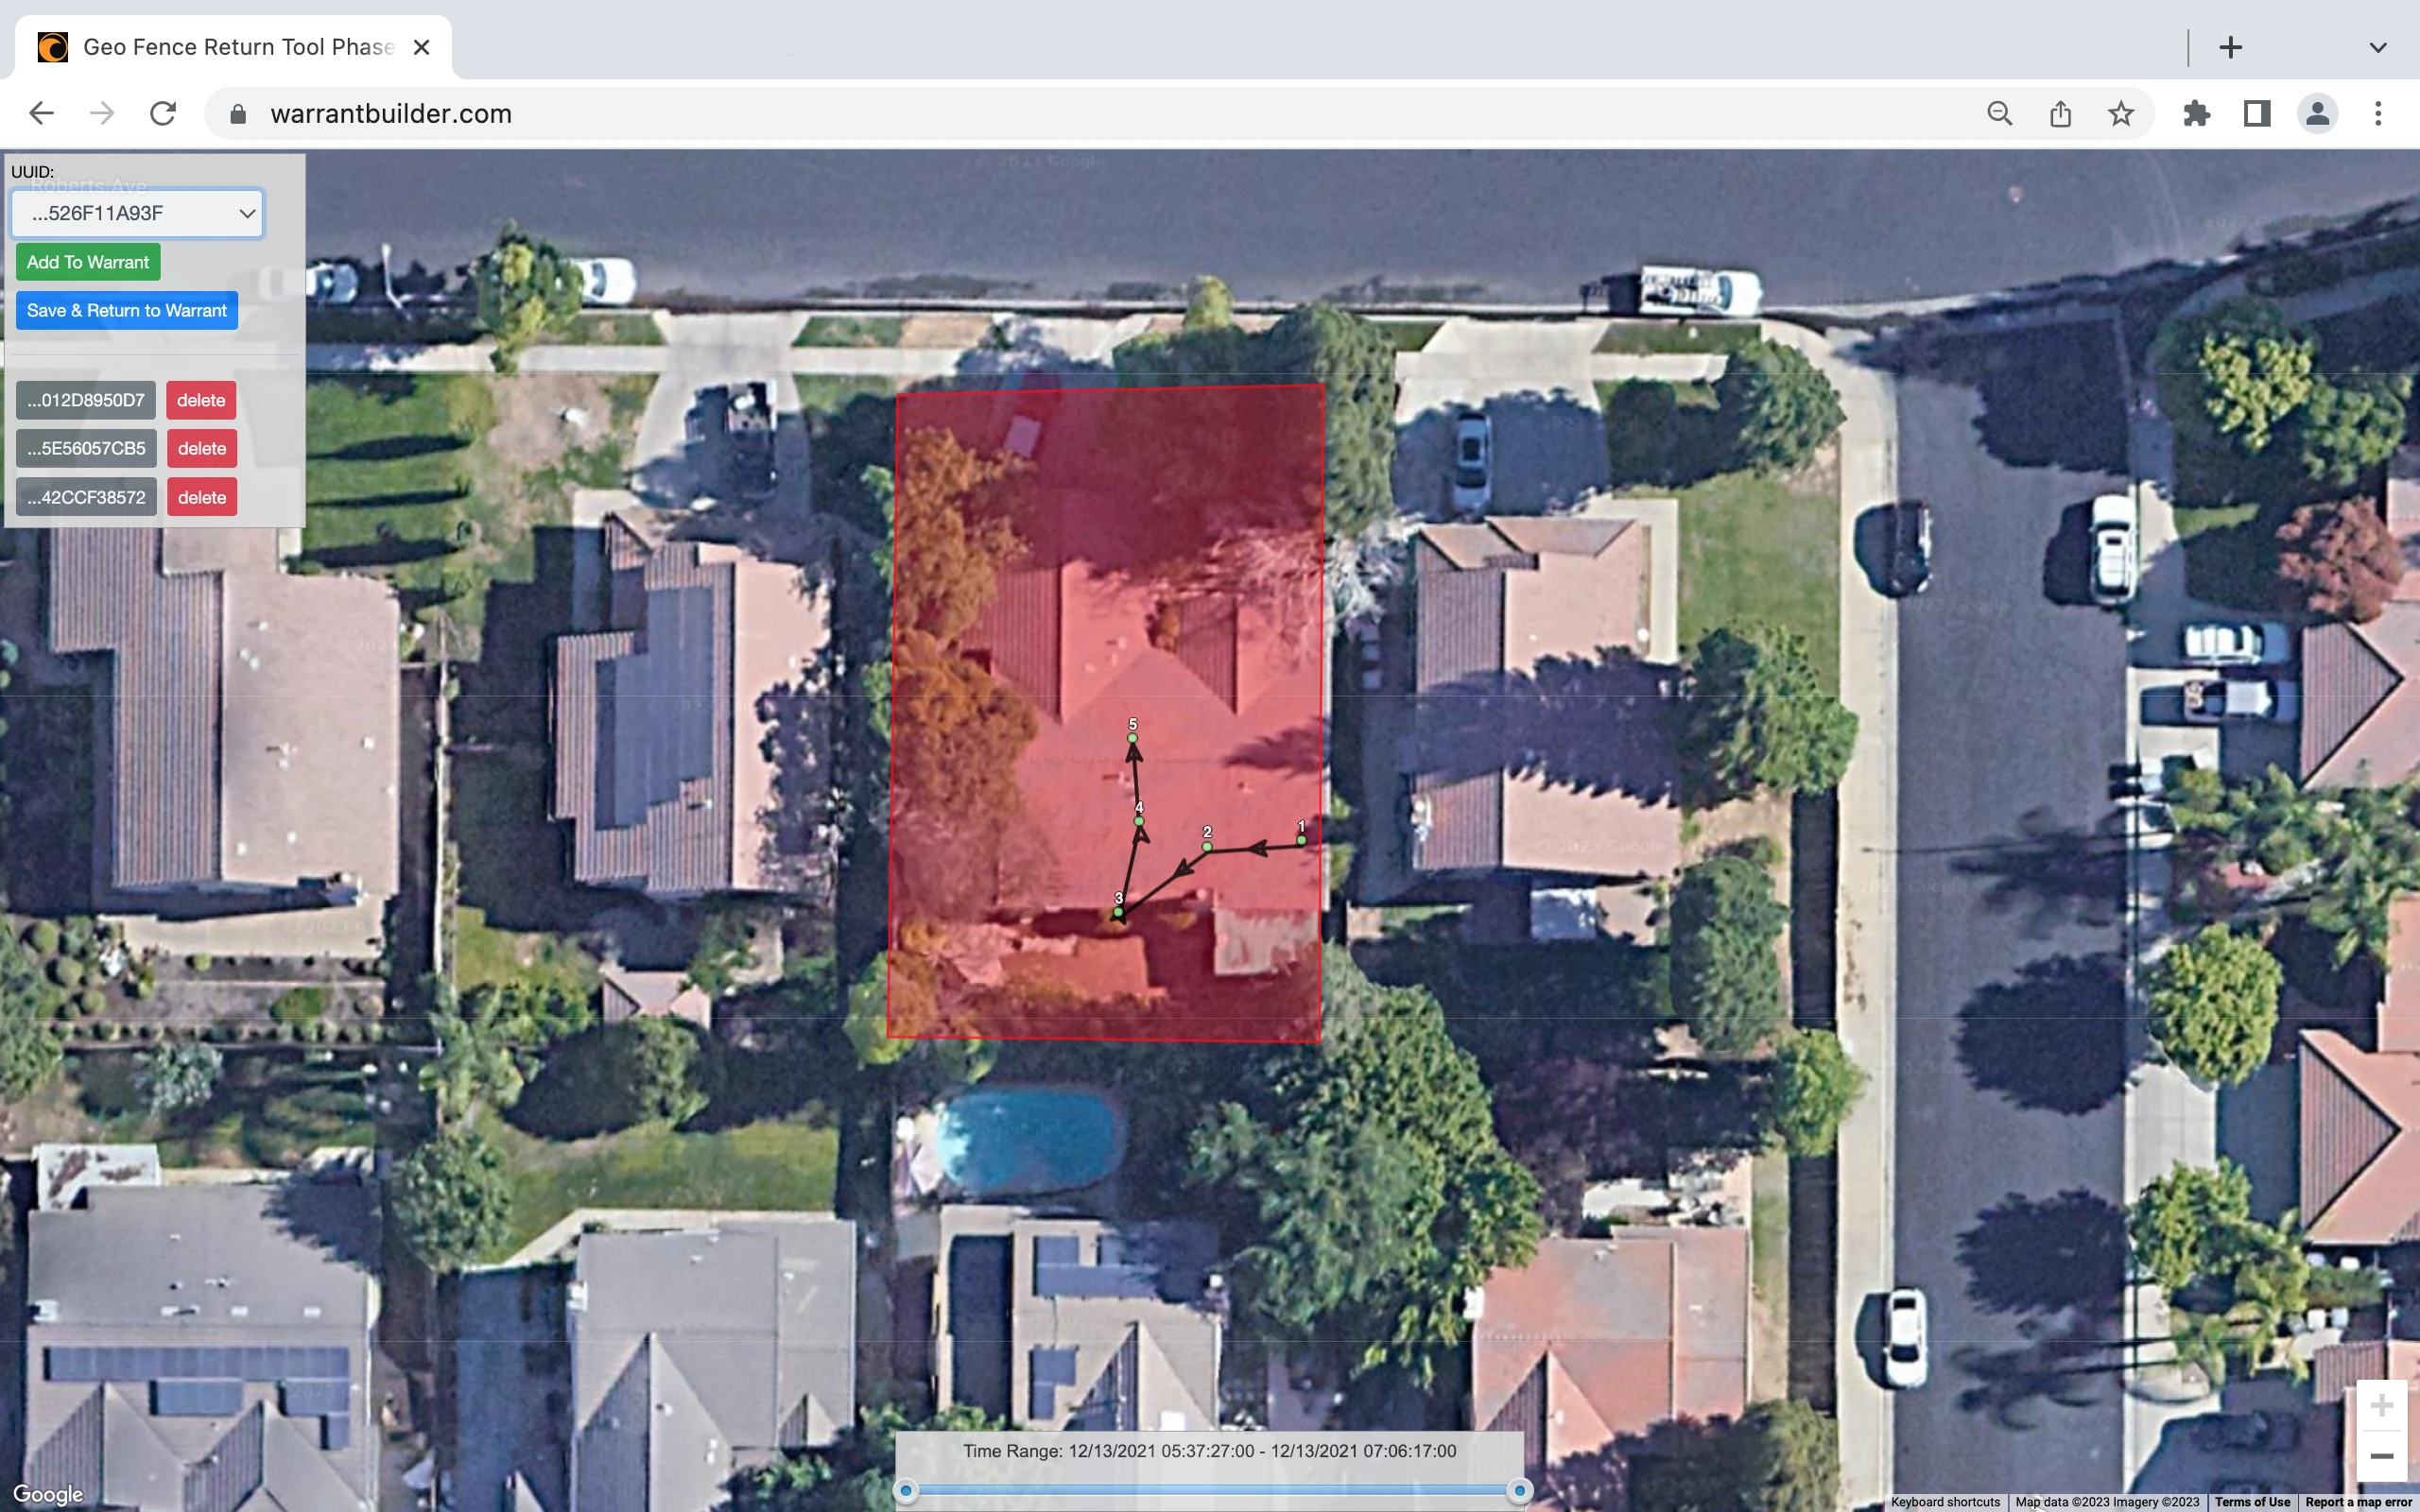 Warrant Builder geofence warrant tool showing Phase 1 returns, reverse location anonymized ID, mobile phones